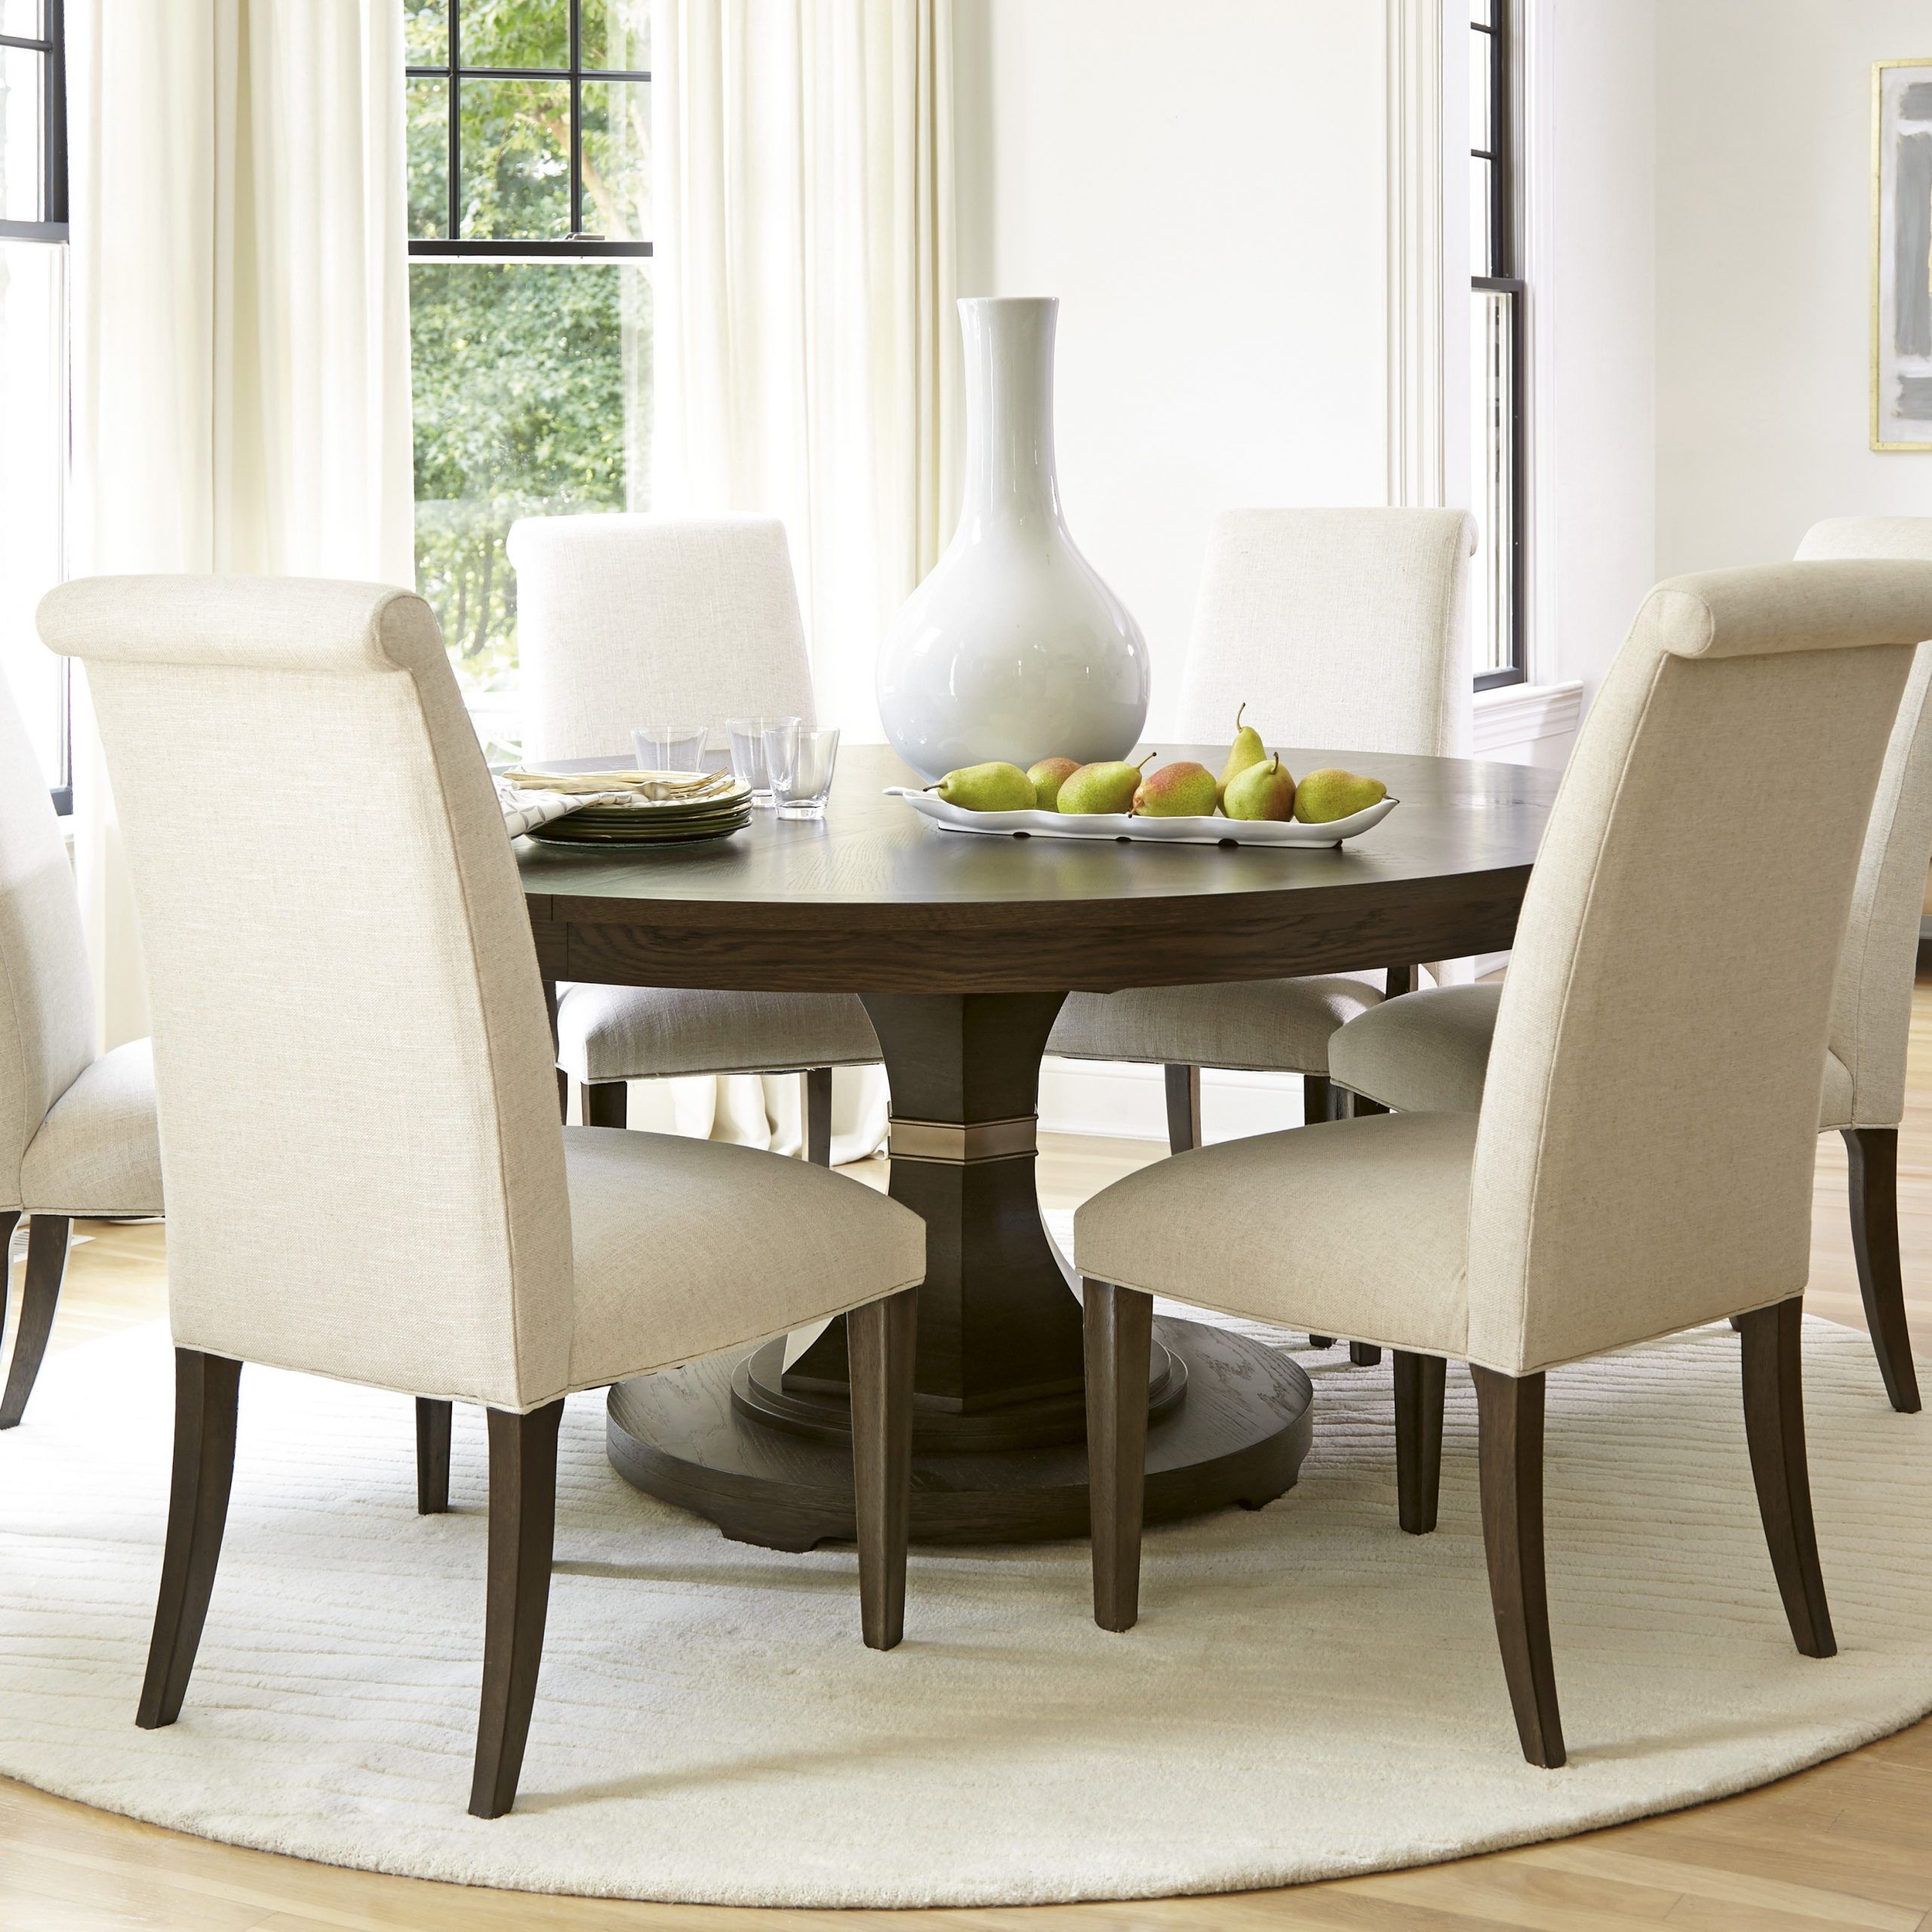 Widely Used Rae Round Pedestal Dining Tables Intended For Dining Table Bench Seat Dimensions Big Small Room Sets Ideas (View 19 of 25)